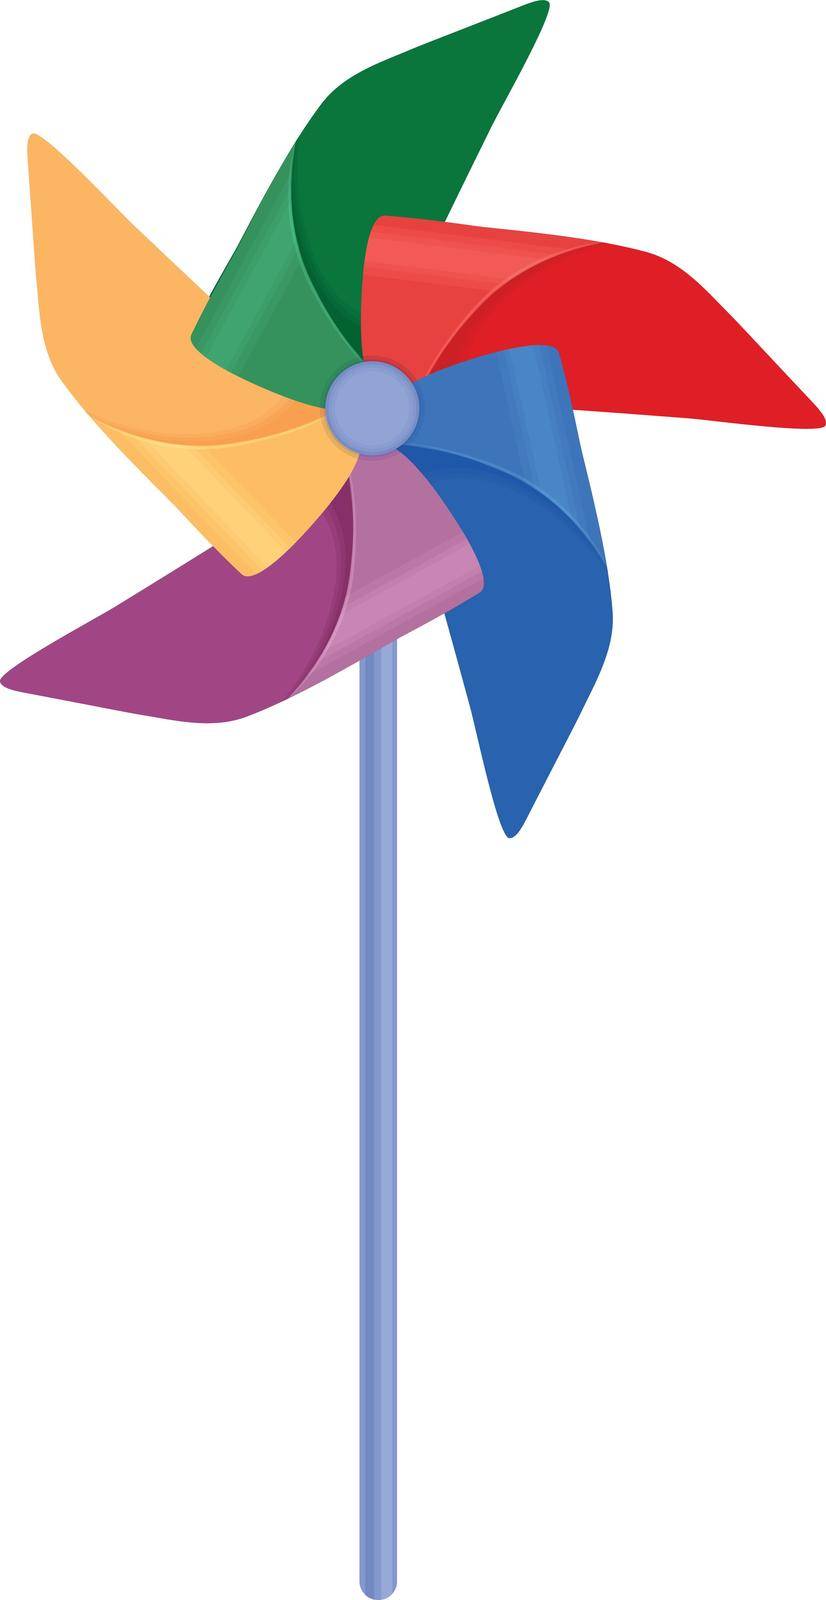 Children s toy windmill. Multi-colored windmill for children. Toy, vector illustration isolated on a white background by NastyaN